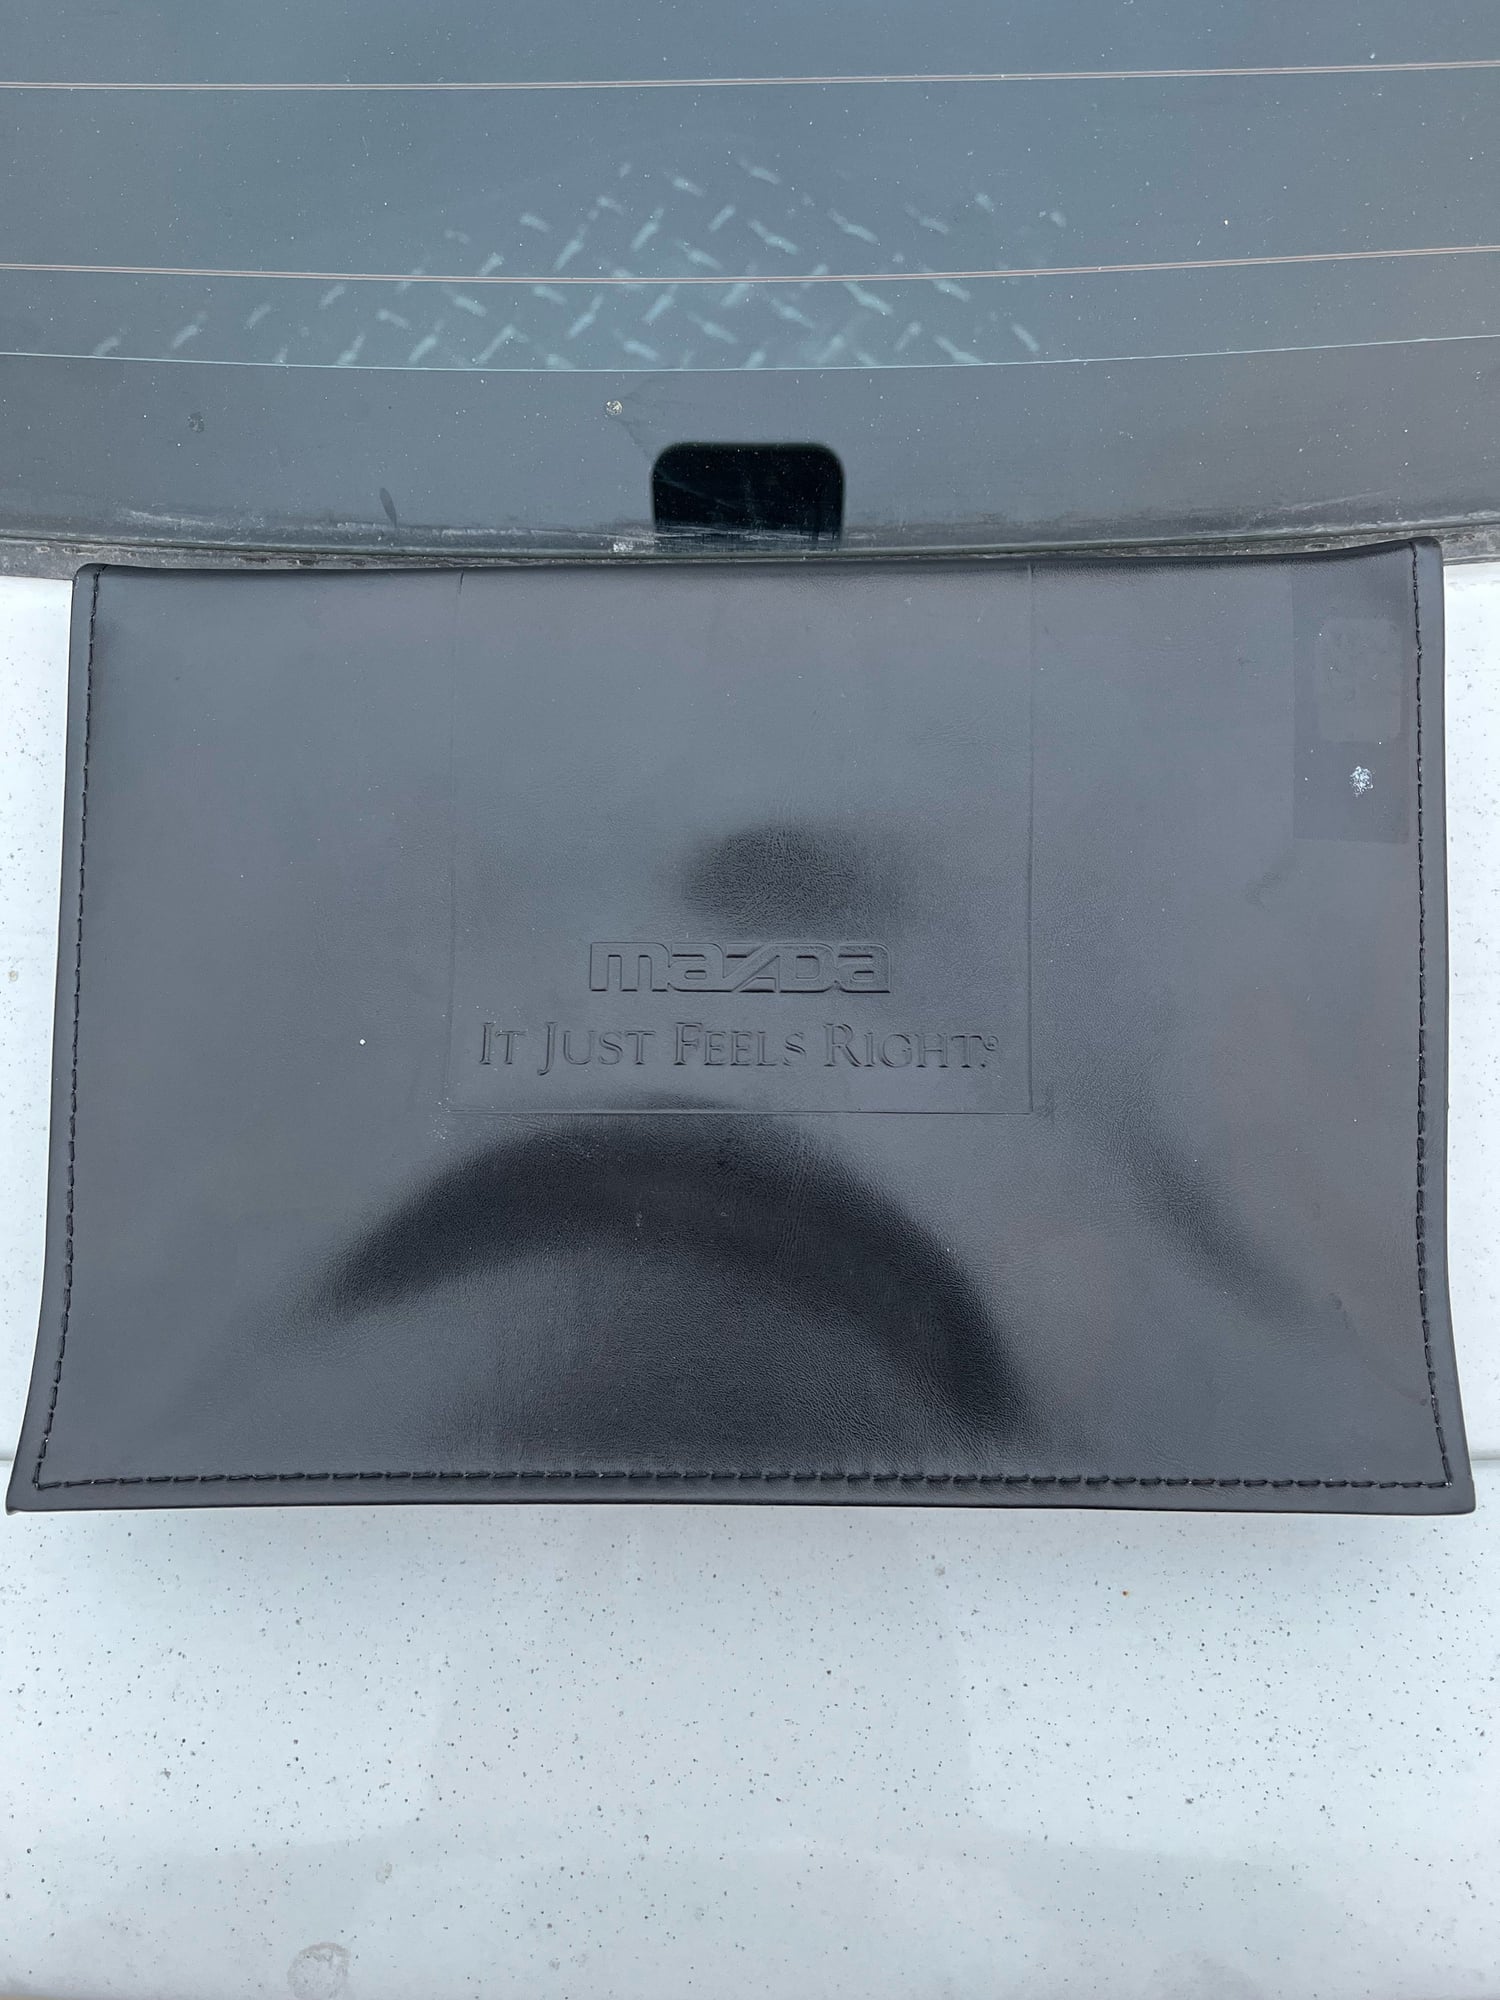 Accessories - 1995 Mazda RX-7 Owner’s Manual & Pouch - Used - 1995 Mazda RX-7 - San Marcos, CA 92069, United States